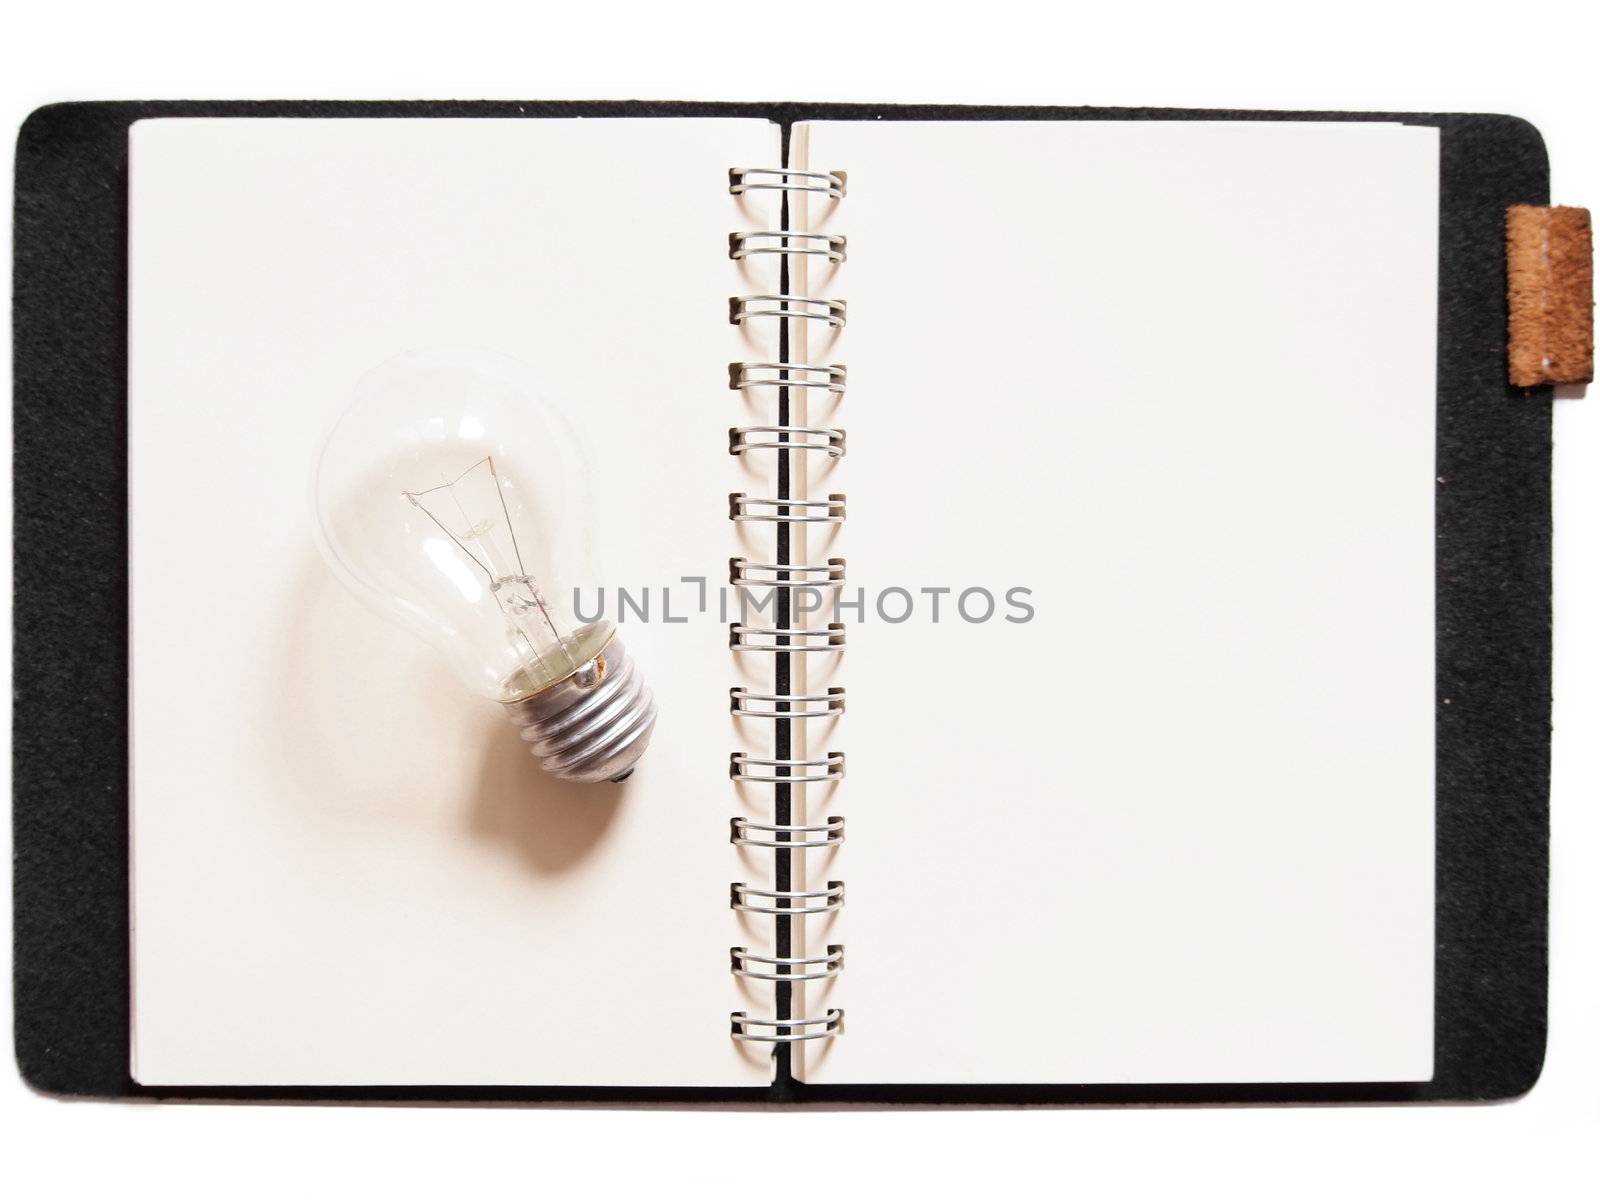 Light bulb placed on notebook